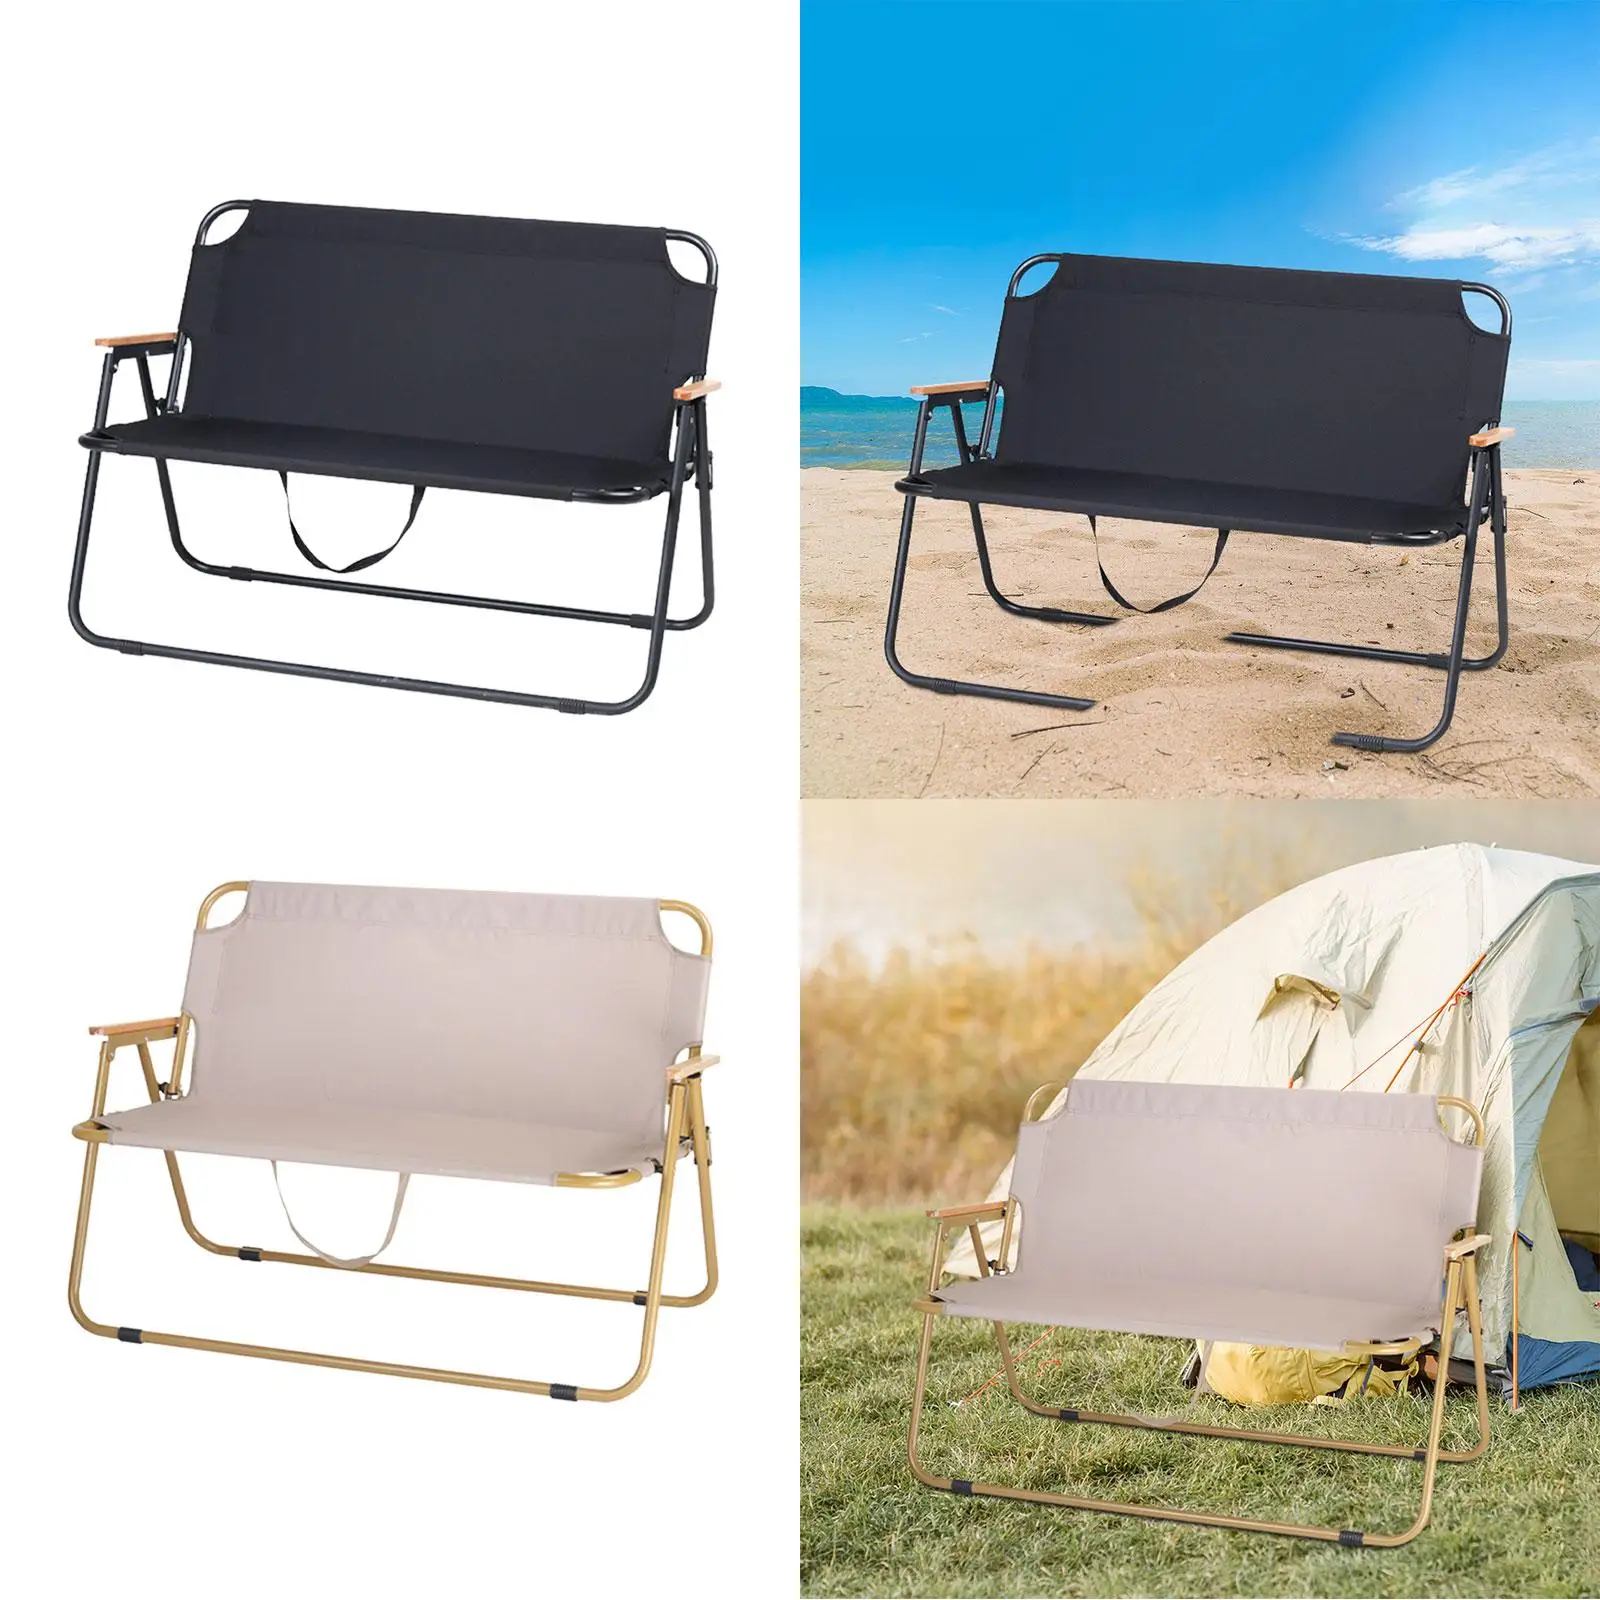 Folding Camping Chair Travel Outdoor Hiking Camping Stool Chair Camping Seat Outside Lightweight Camp Chair Armchair